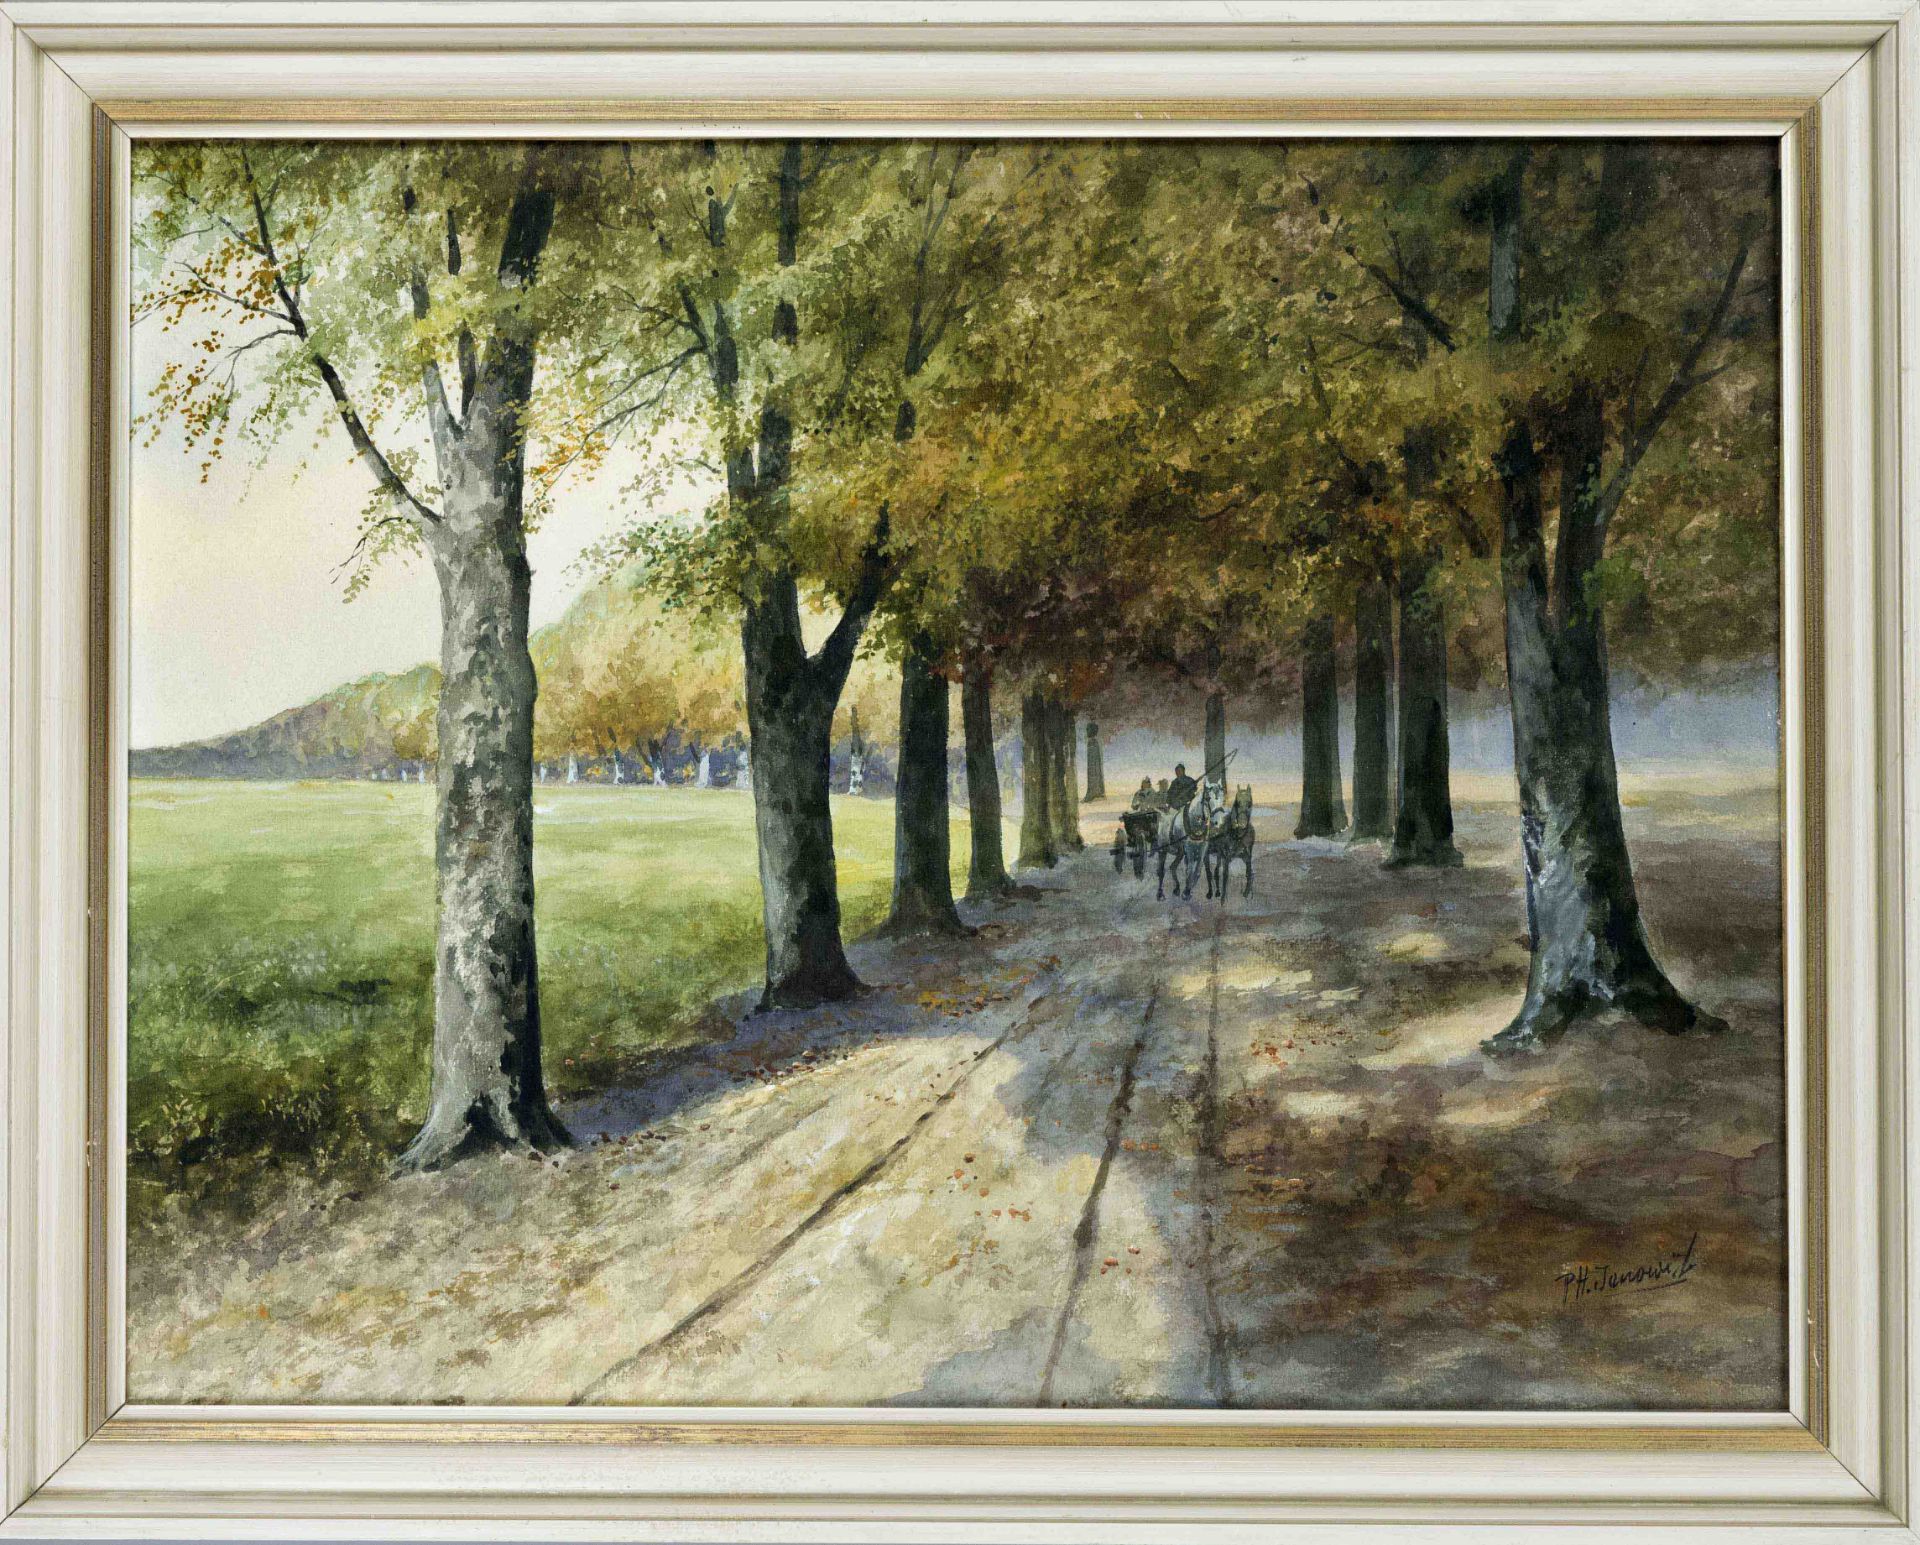 P.H. Janowitz, unidentified artist 1st half 20th century, Carriage in the shade of an avenue in a